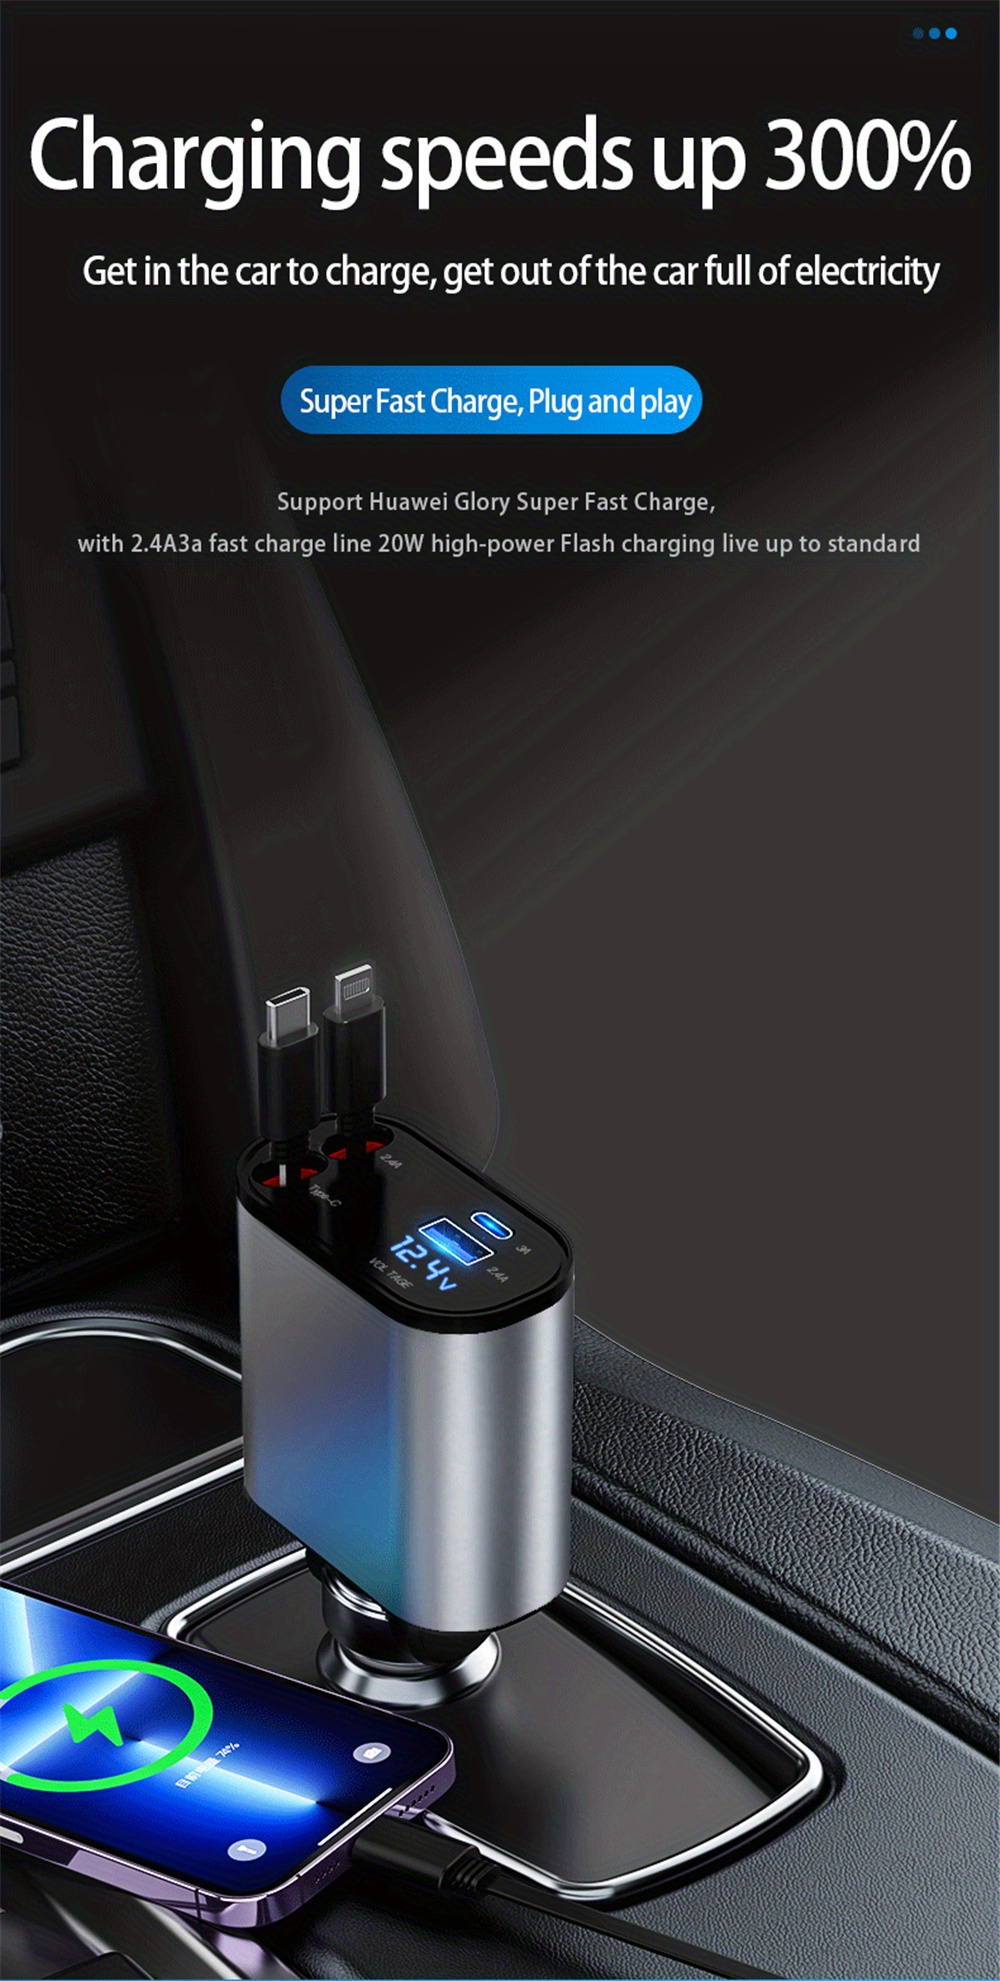 100w 4 in 1 car charger comes with retractable cable digital display fast charging usb type c for iphone xiaomi samsung adjustable cord cigarette lighter adapter details 2